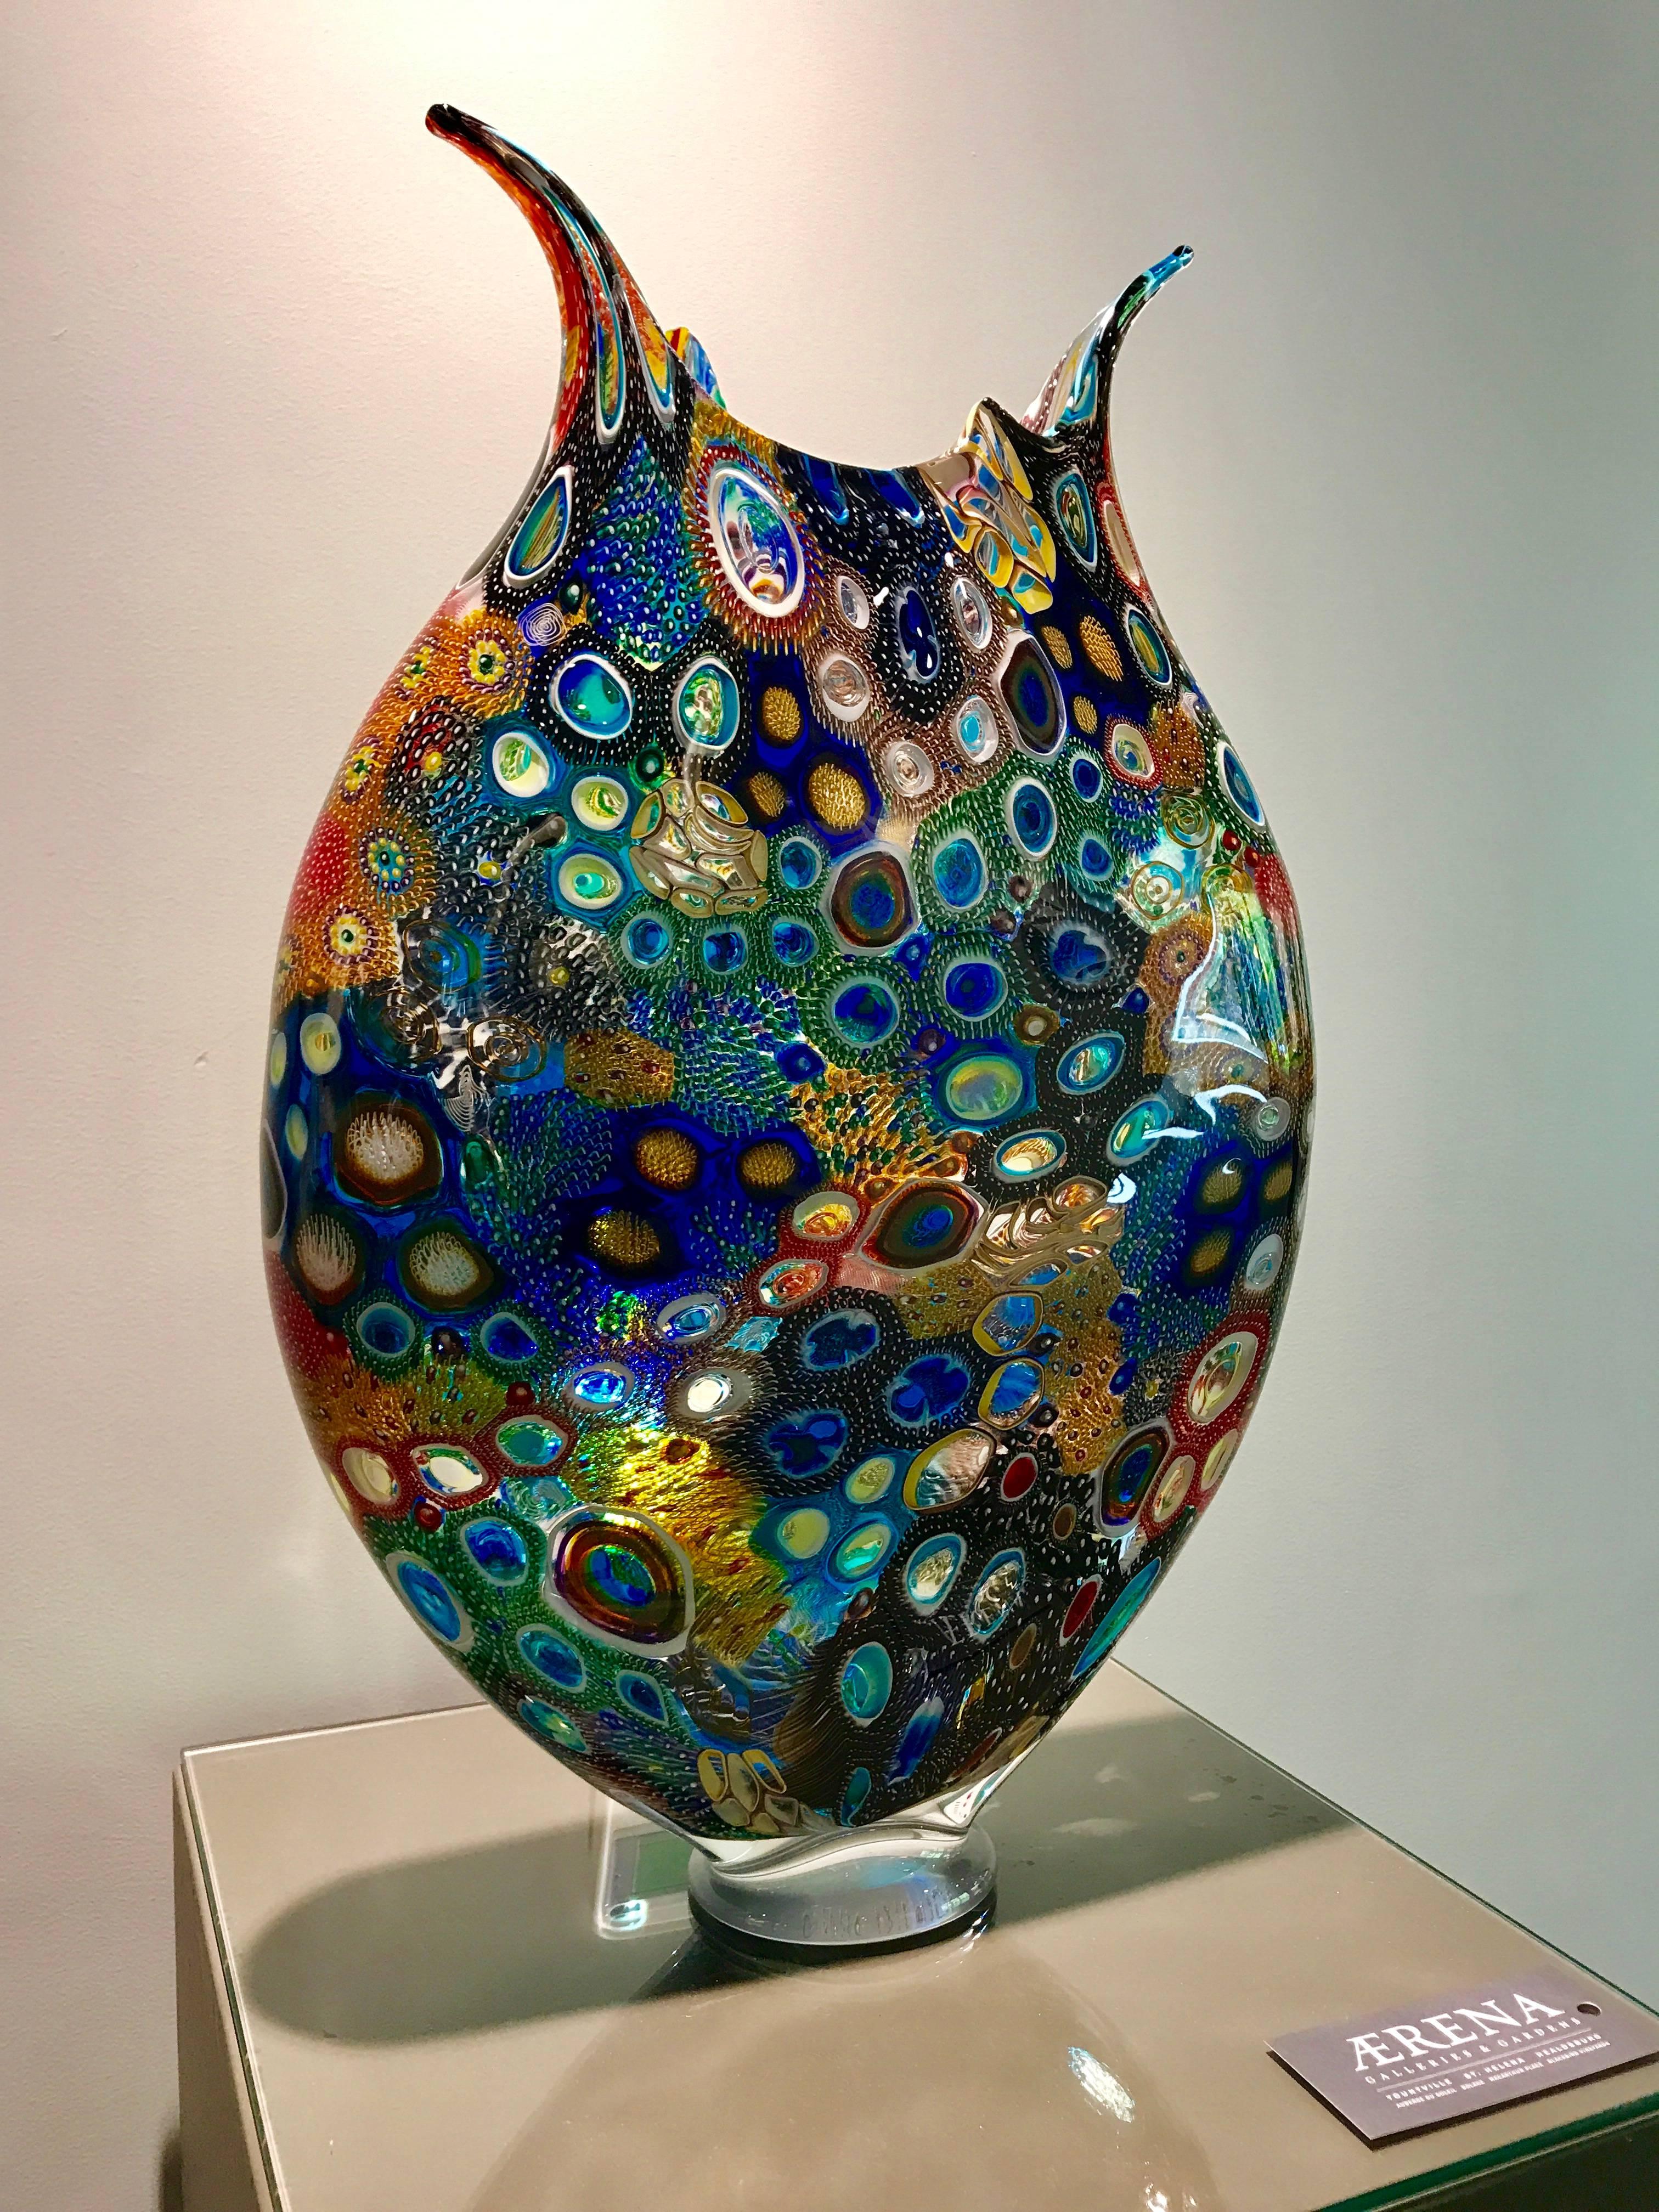 Artist David Patchen creates vivid and luminous sculptural glass works using the time-honored glass blowing techniques of cane and murrine.

From David's Artist Statement: 

I find glass as seductive as it is challenging. As a particularly